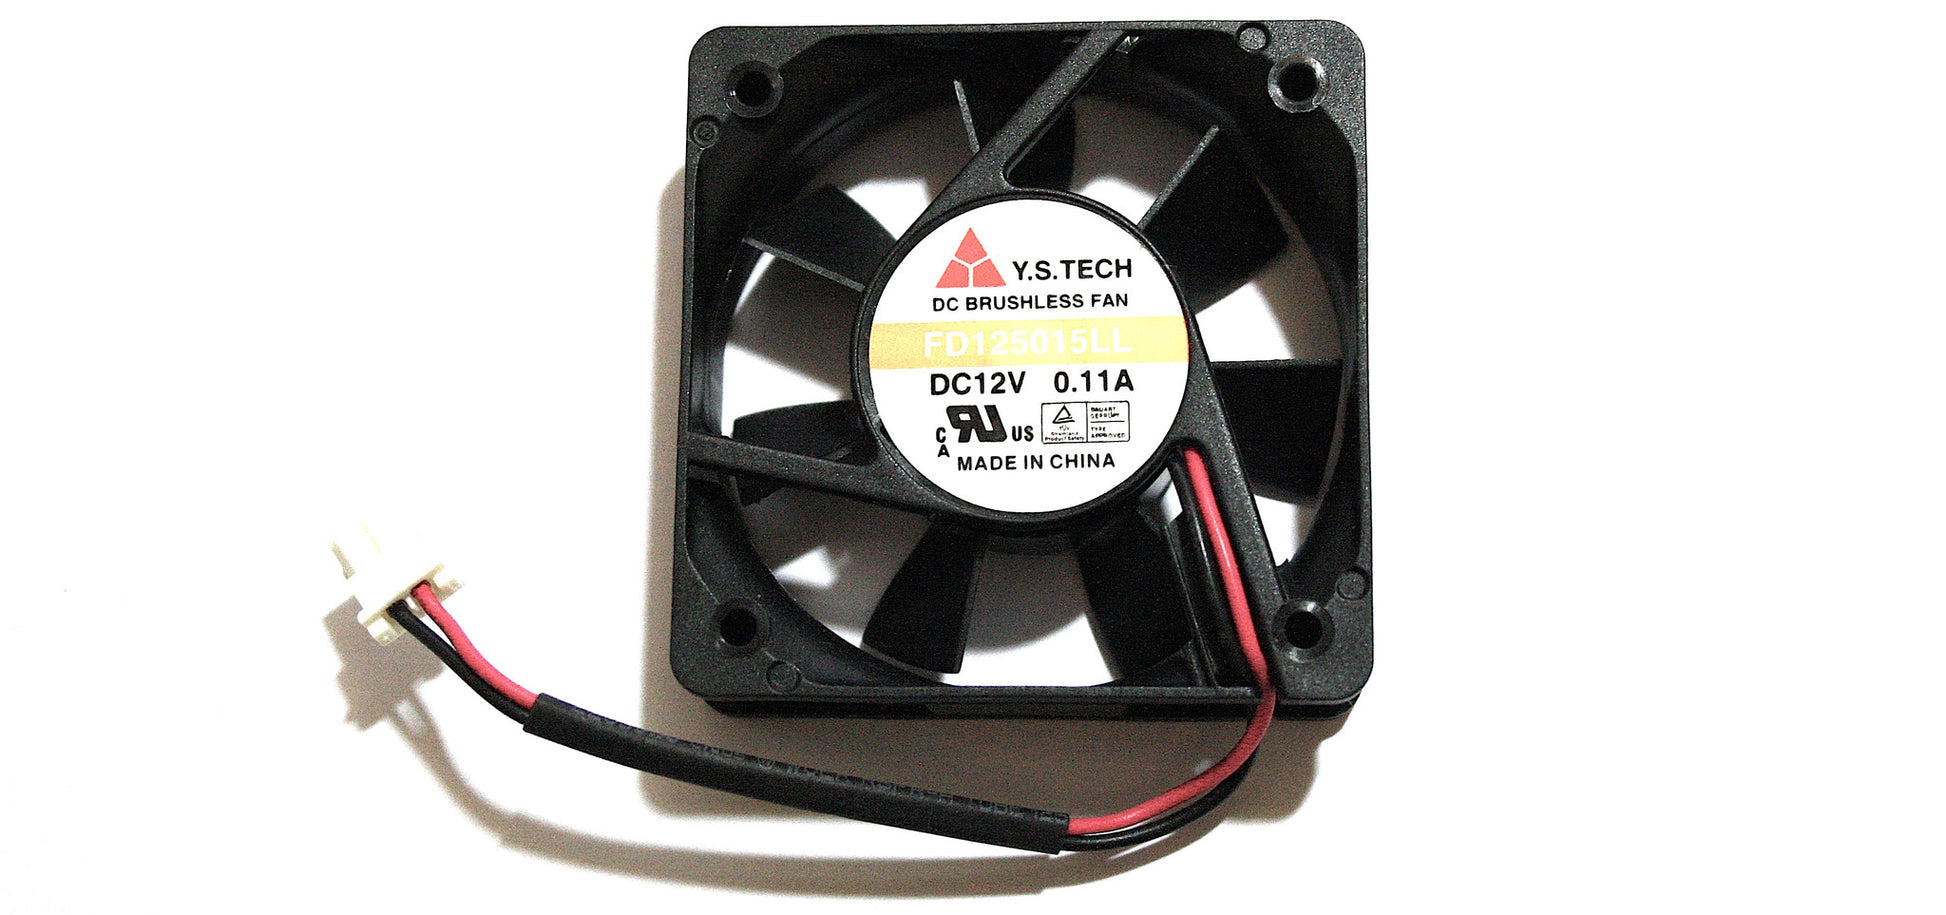 LG Cooling Fan EAL60658102 (FD125015LL) - Spared Parts UK